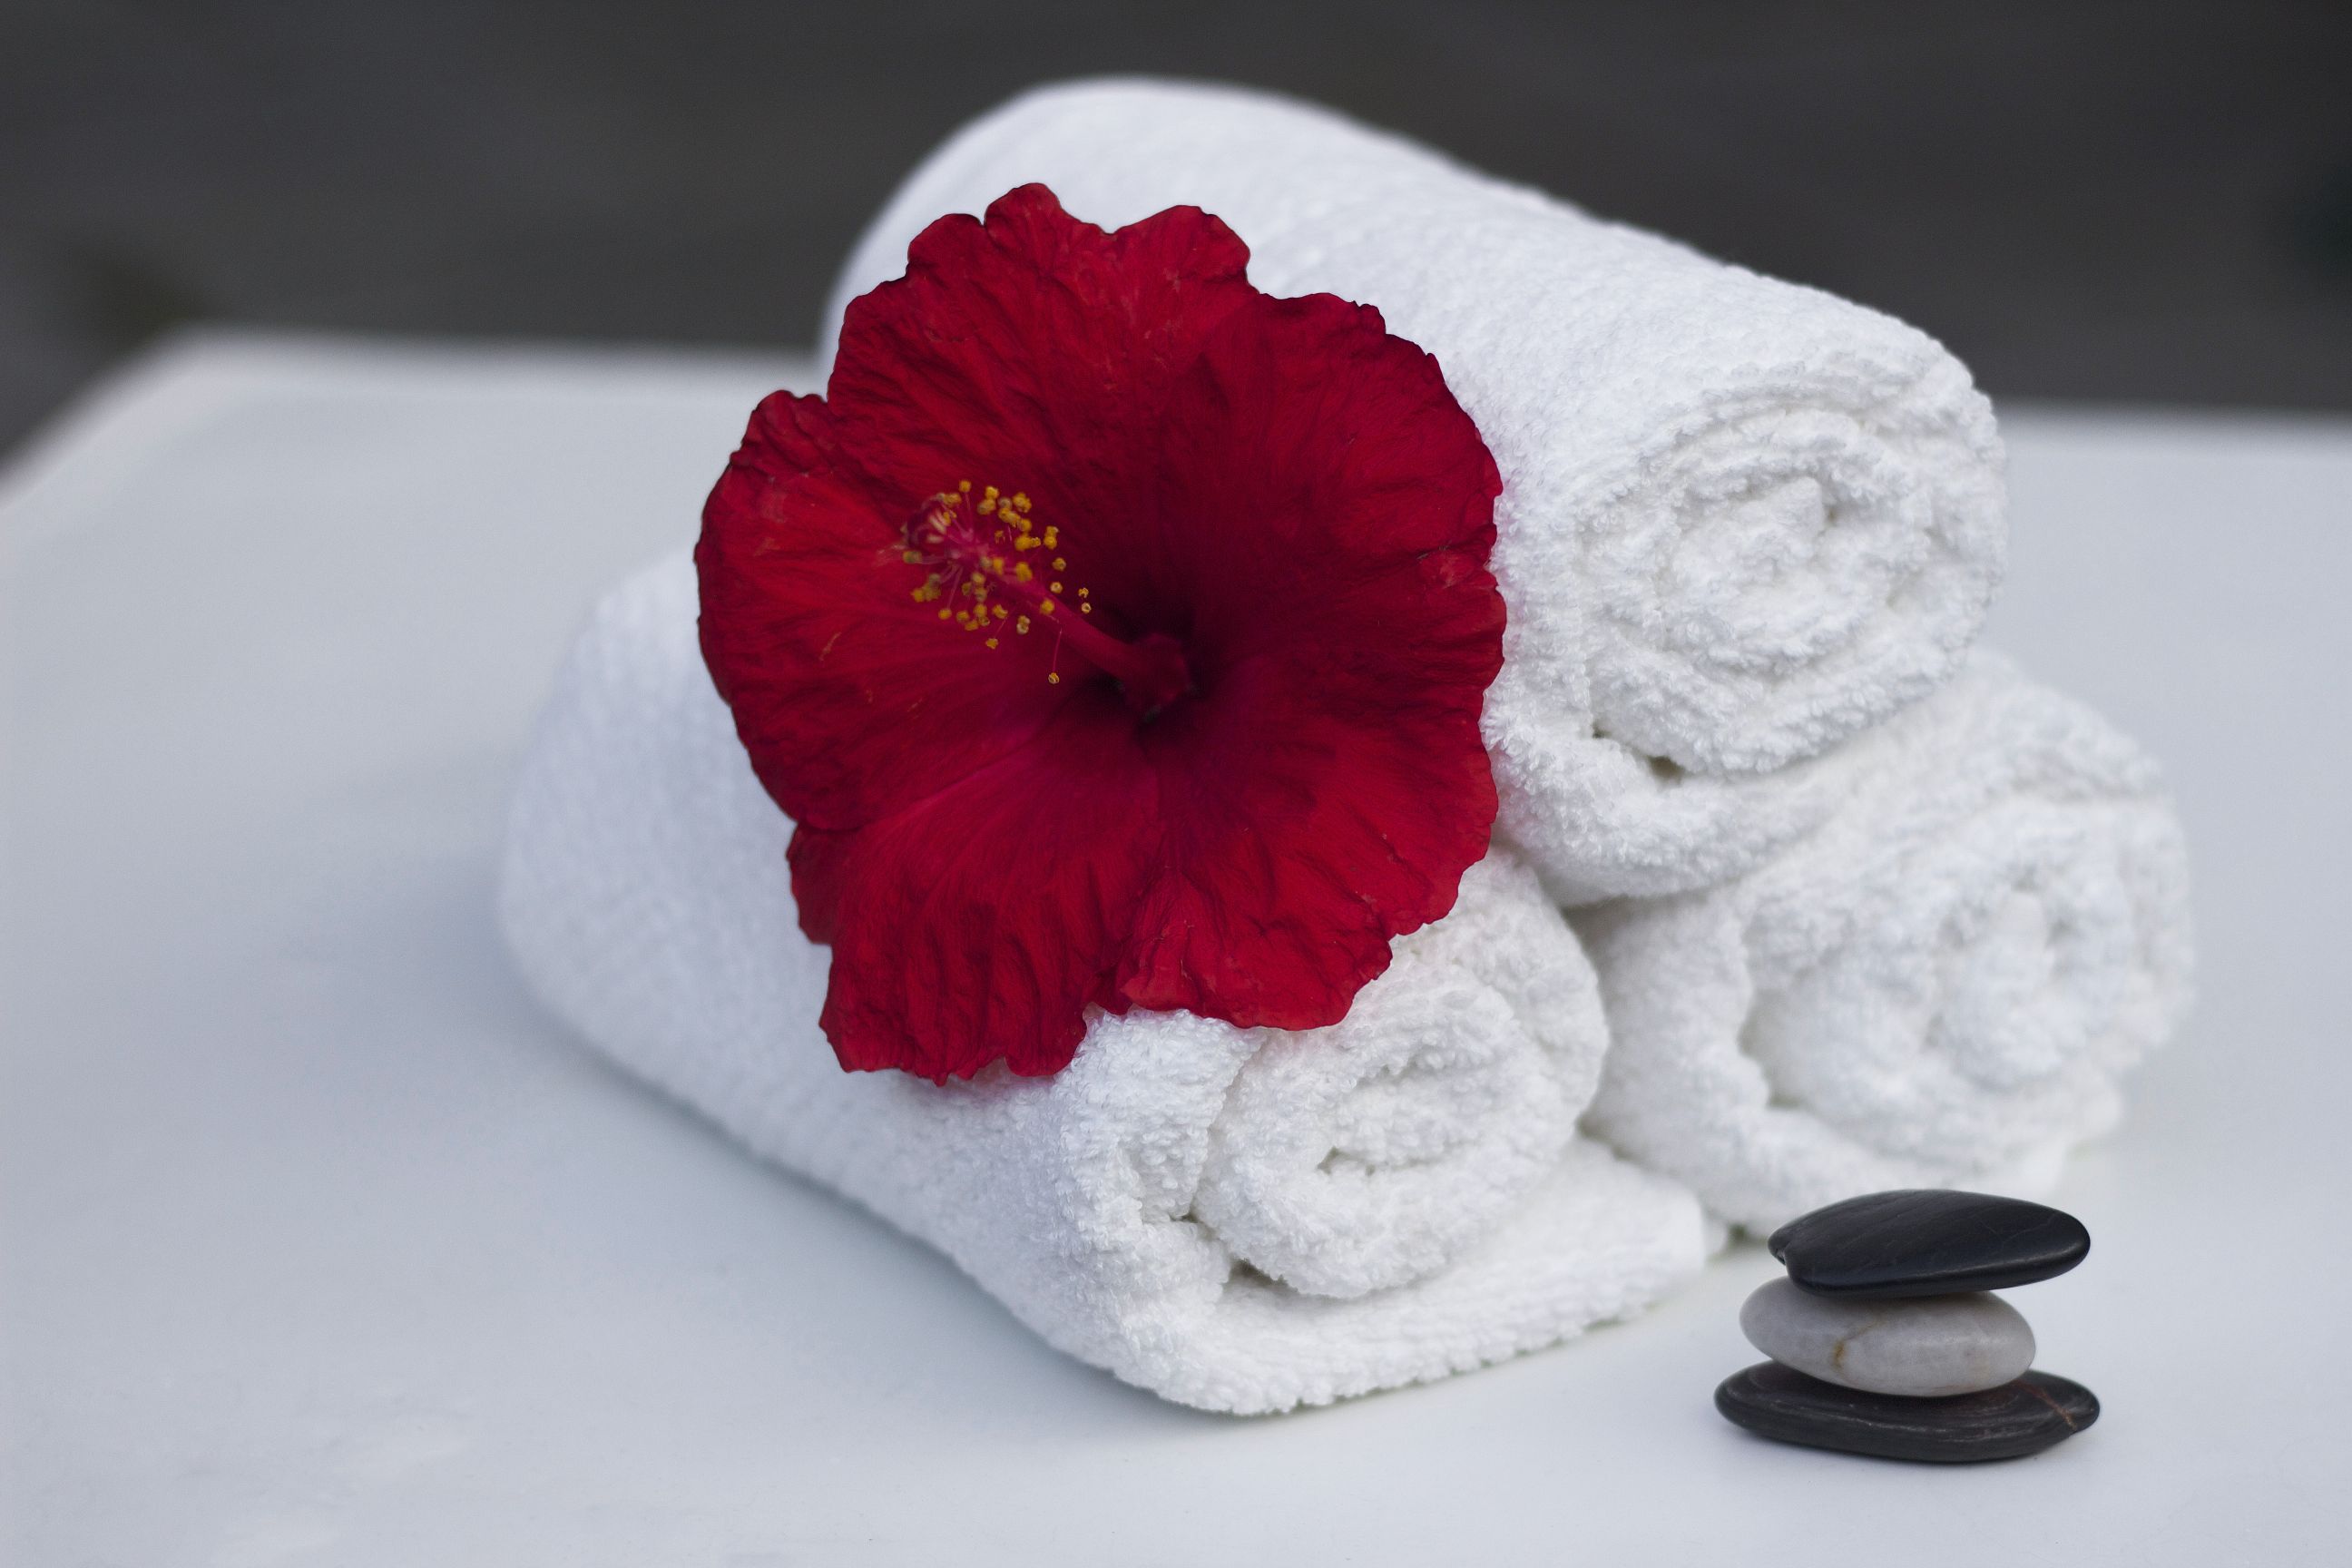  http://absfreepic.com/free-photos/download/red-flower-on-towels-5184x3456_87755.html